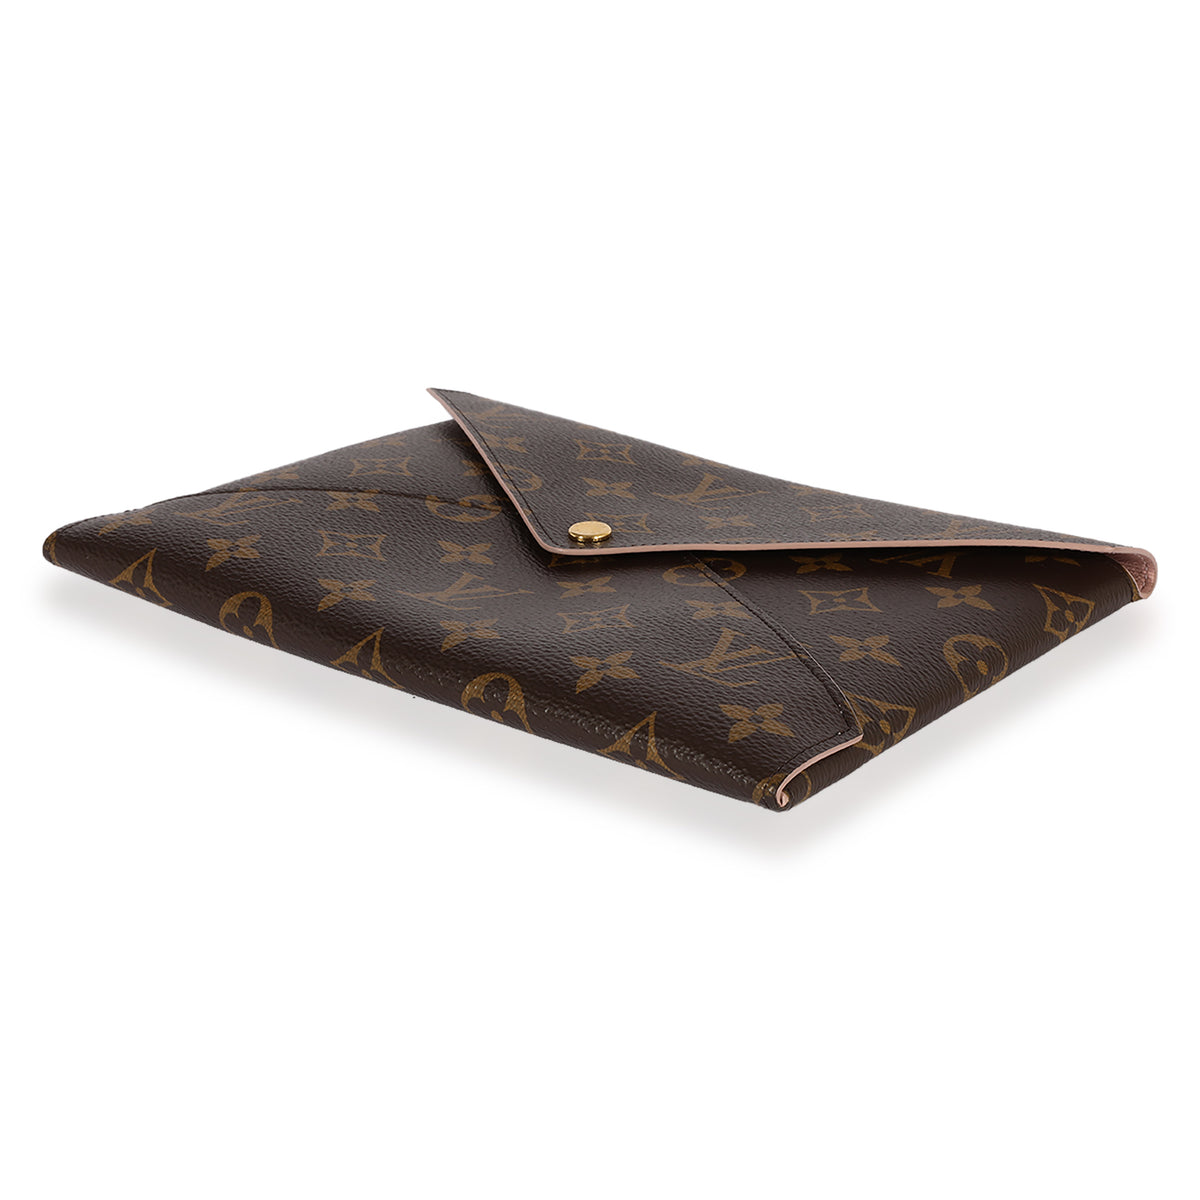 NEW Louis Vuitton Large Kirigami Pouch in Monogram